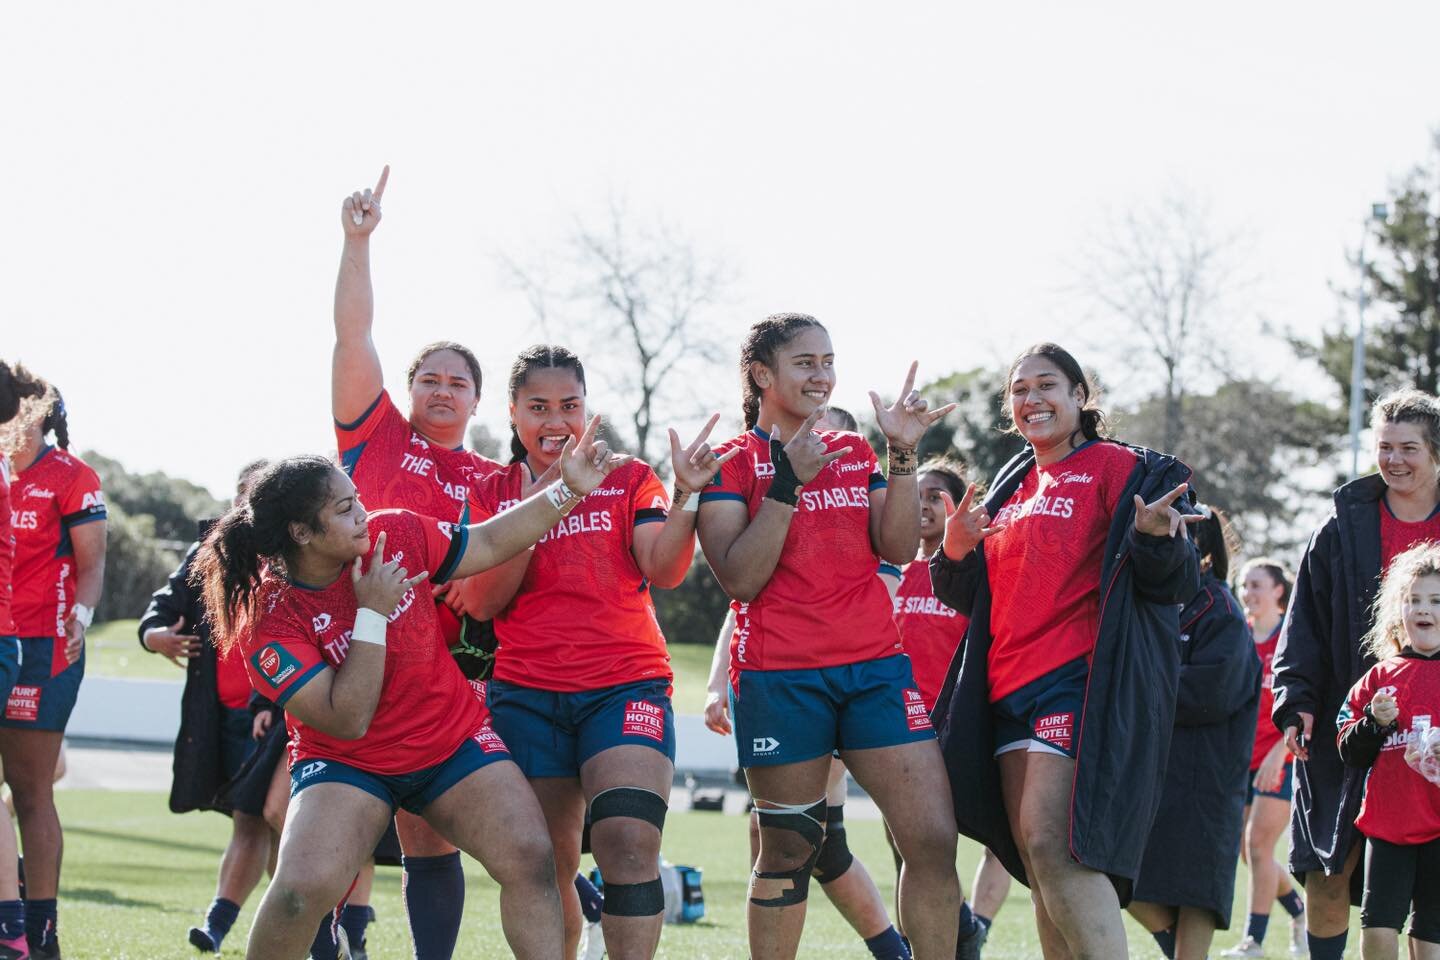 Its International Women&rsquo;s Day! 🎉 
Shout out to all our wāhine, both on and off the field, who have made our game possible. Here&rsquo;s to another awesome year of women&rsquo;s rugby 💙❤️
#FinzUp #interantionalwomensday